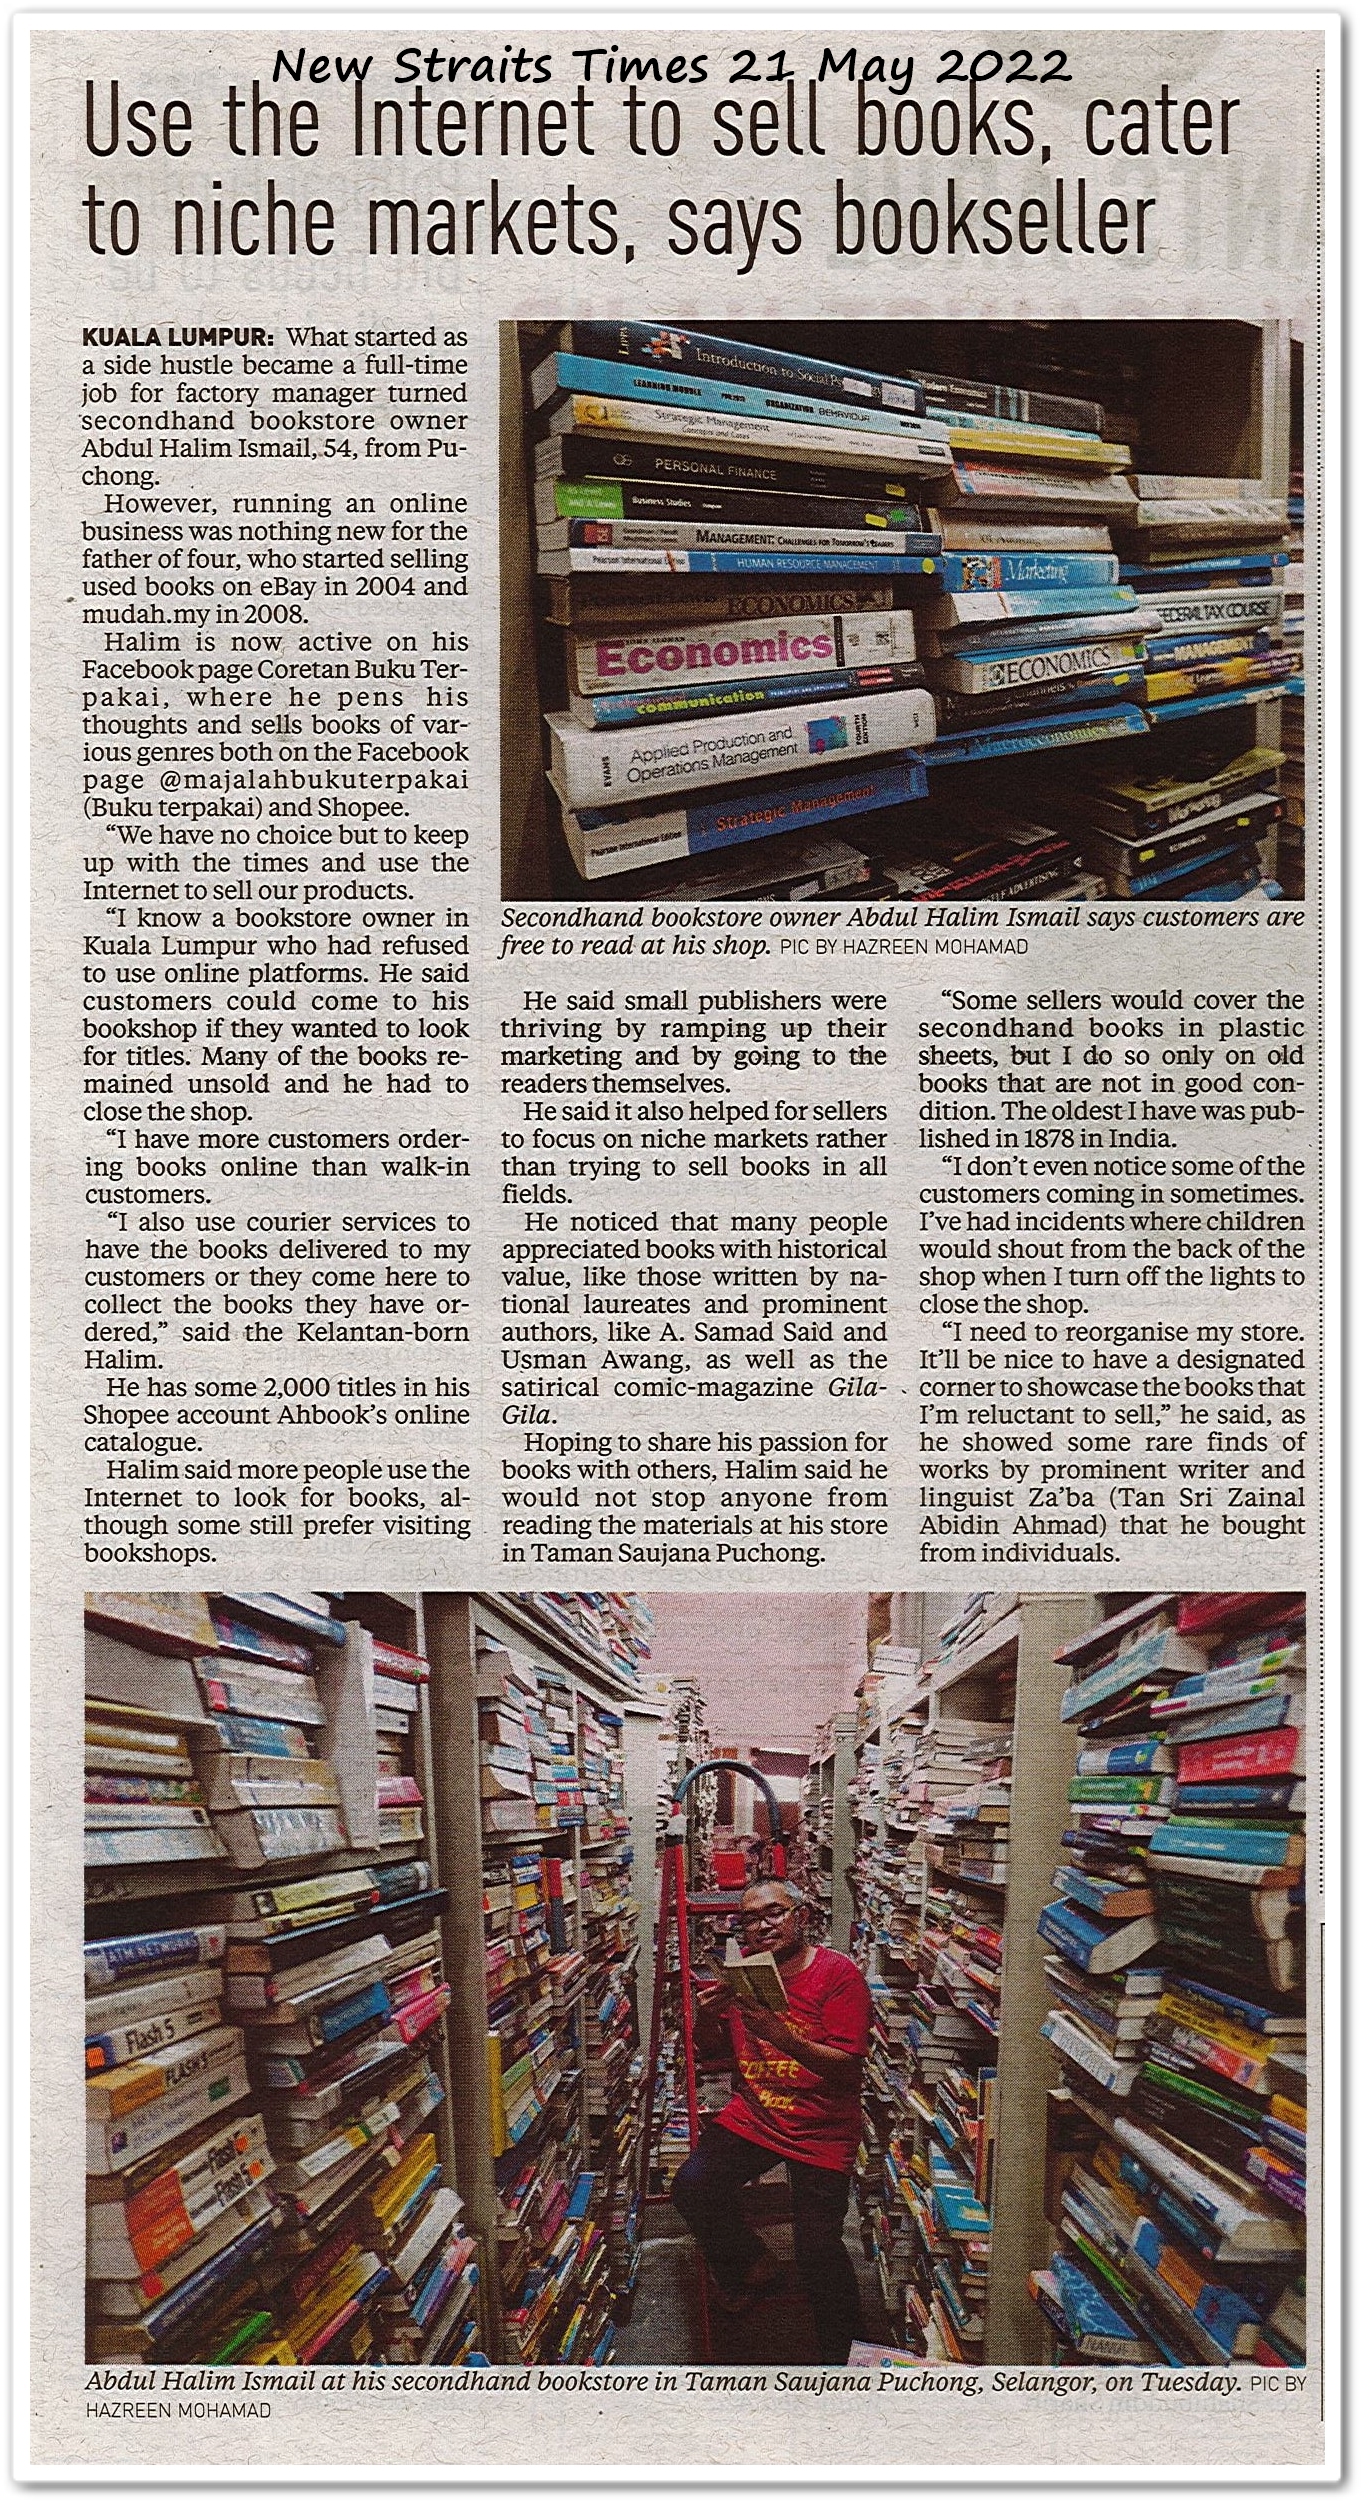 Use the internet to sell books, cater to niche markets, say bookseller - Keratan akhbar New Straits Times 21 May 2022